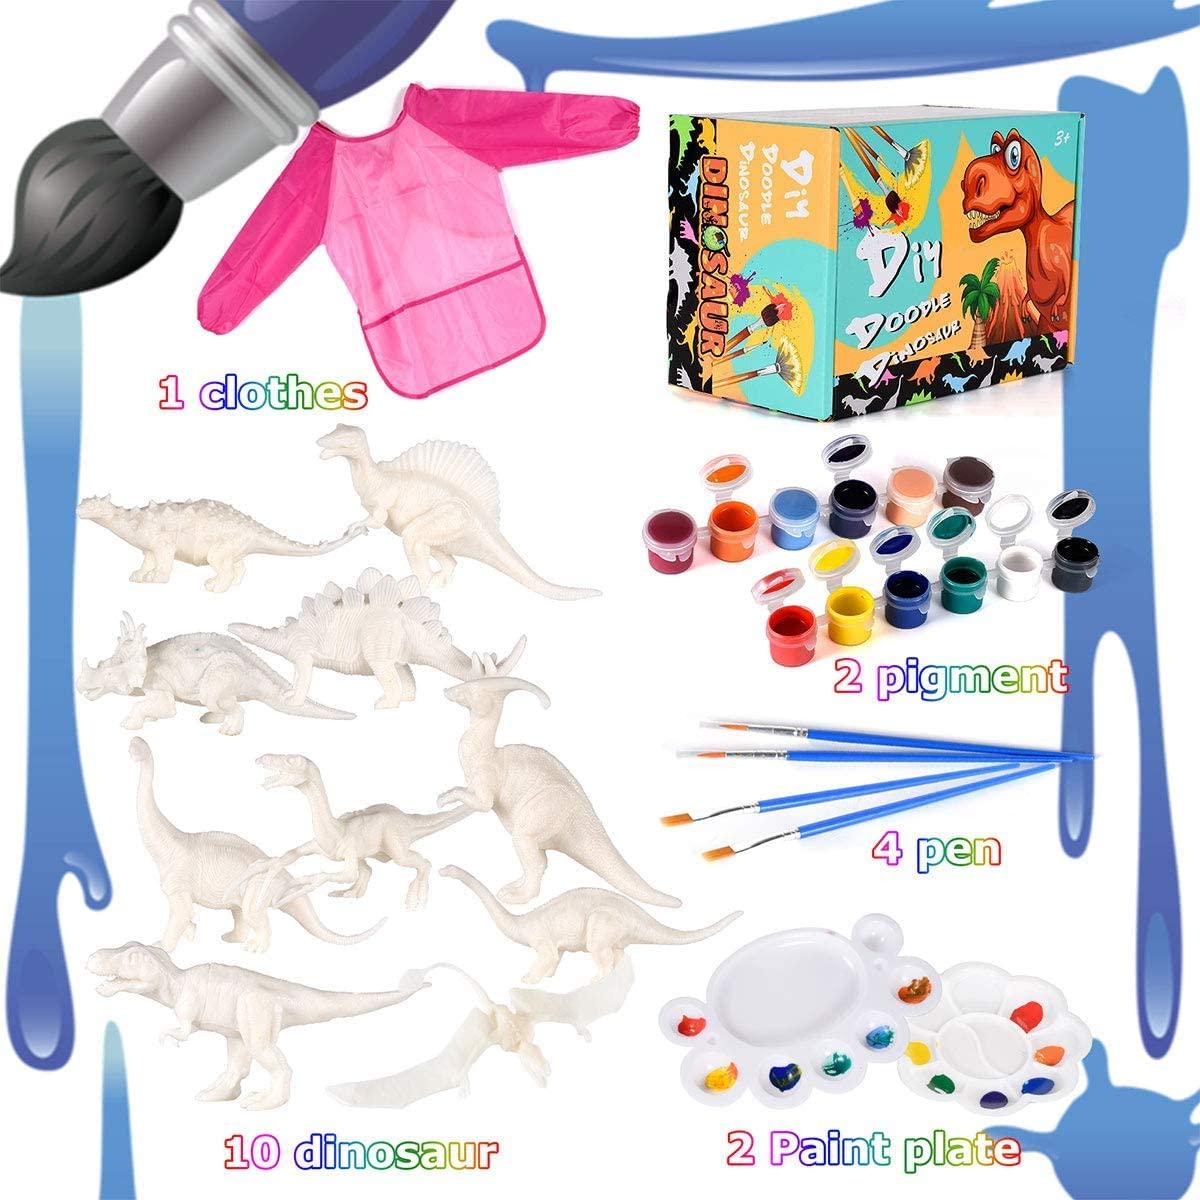 YDPlaier, Kids Arts and Crafts Set Painting Kit - Dinosaurs Toys Art and Craft Supplies Party Favors for Boys Girls Age Over 5 Years Old Kid Creativity DIY Gift Easter Paint Your Own Dinosaur Animal Set